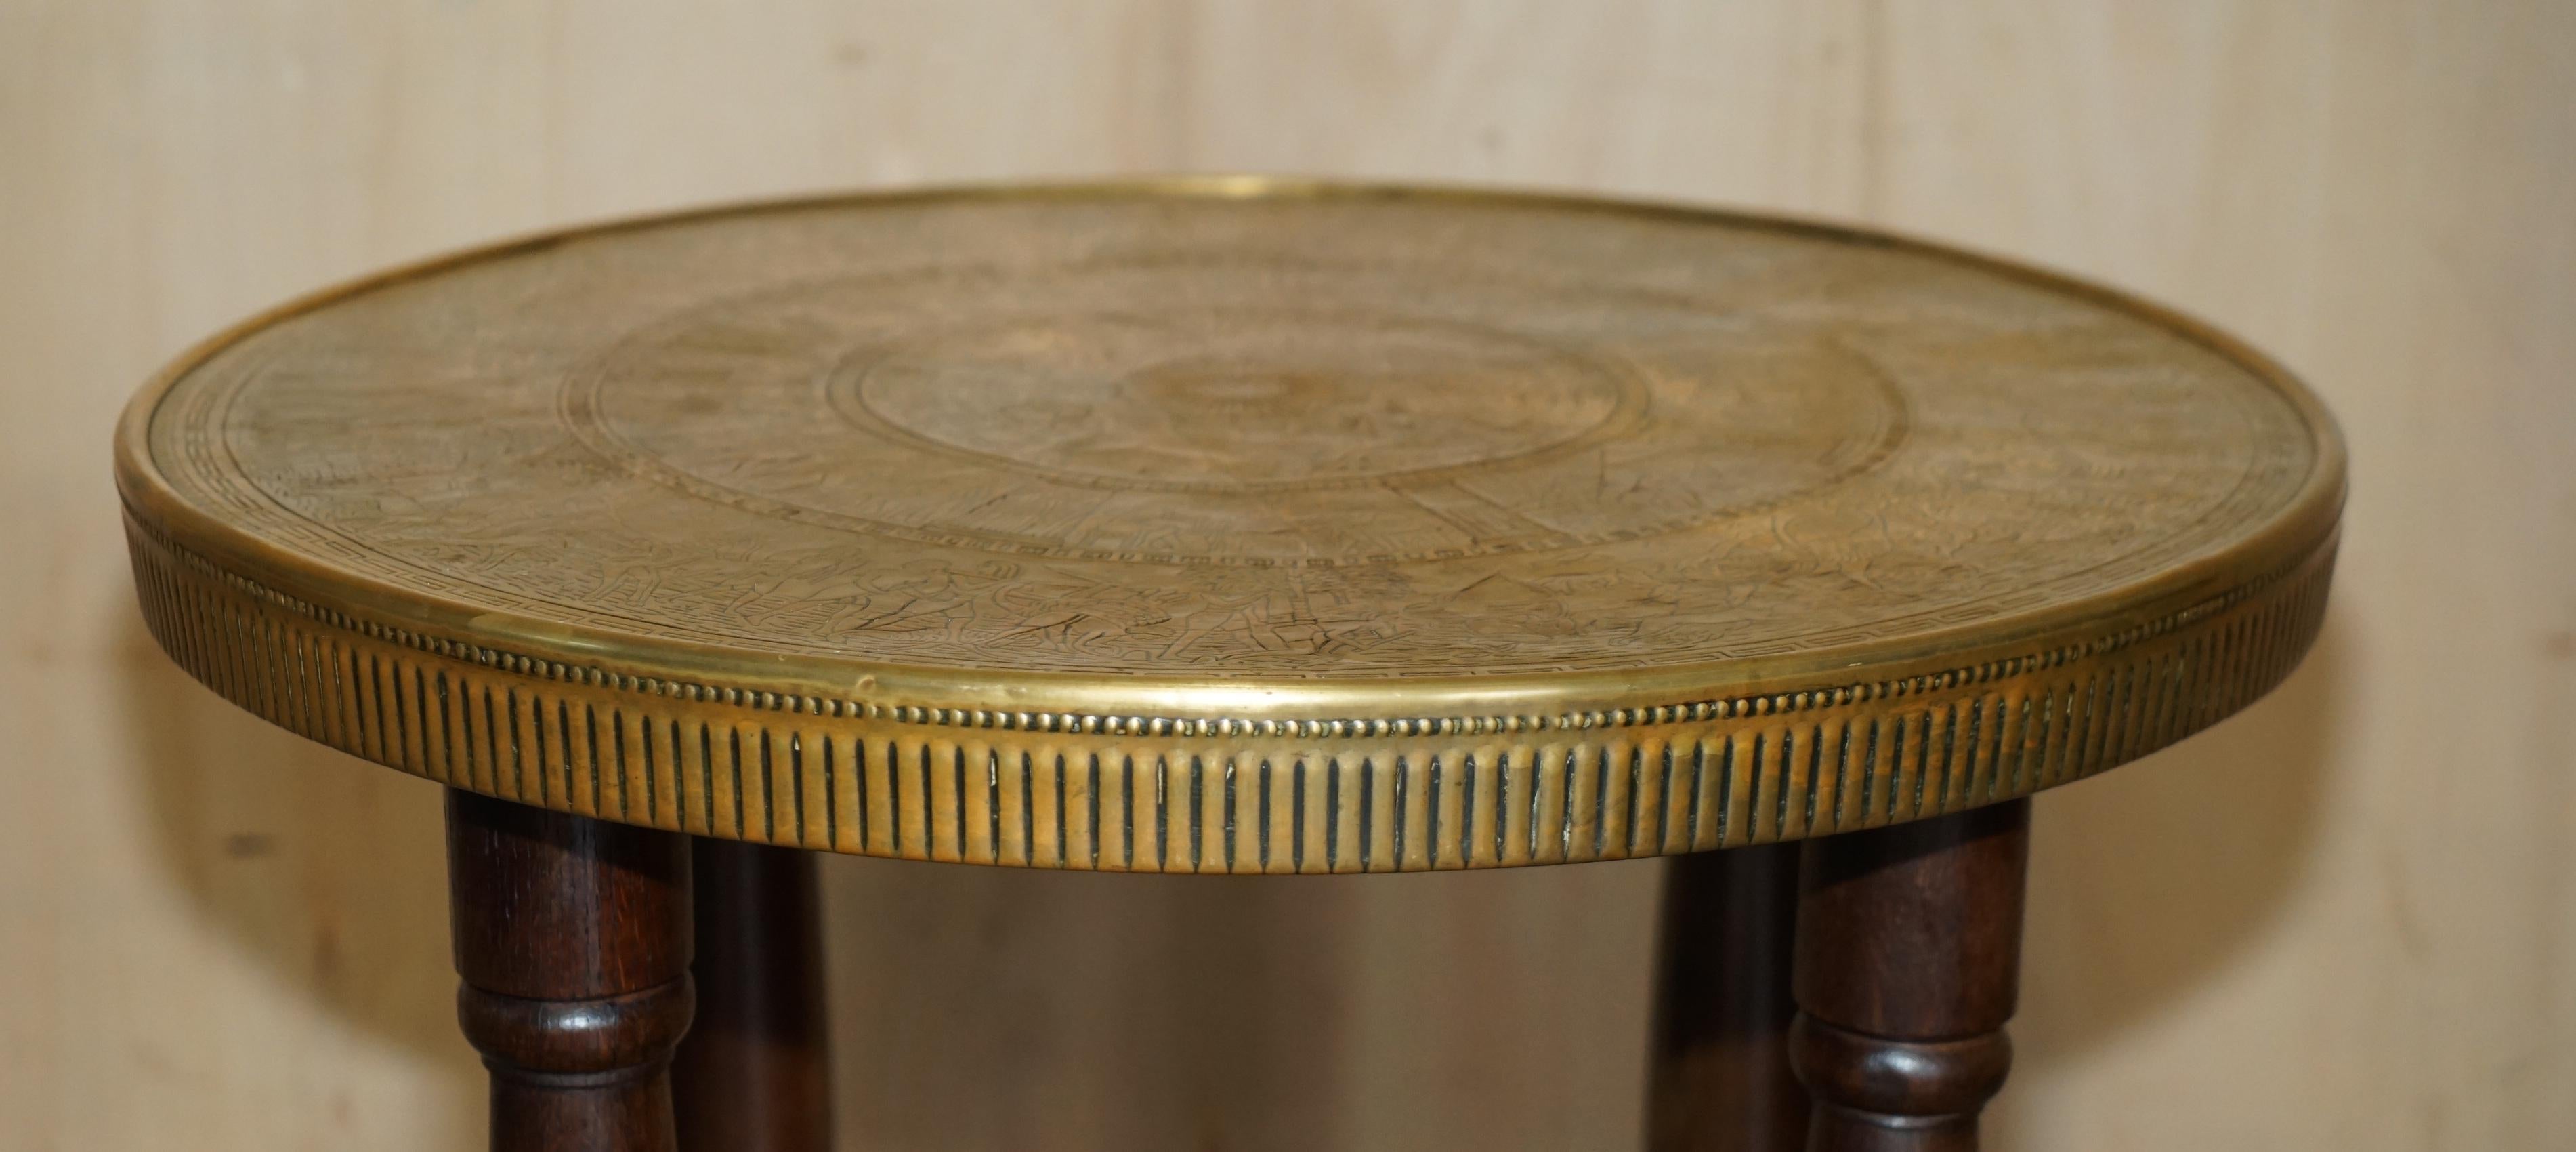 Egyptian LOVELY ANTIQUE CiRCA 1900 EGYPTIAN BRASS ENGRAVED TOP OCCASIONAL CENTRE TABLE For Sale